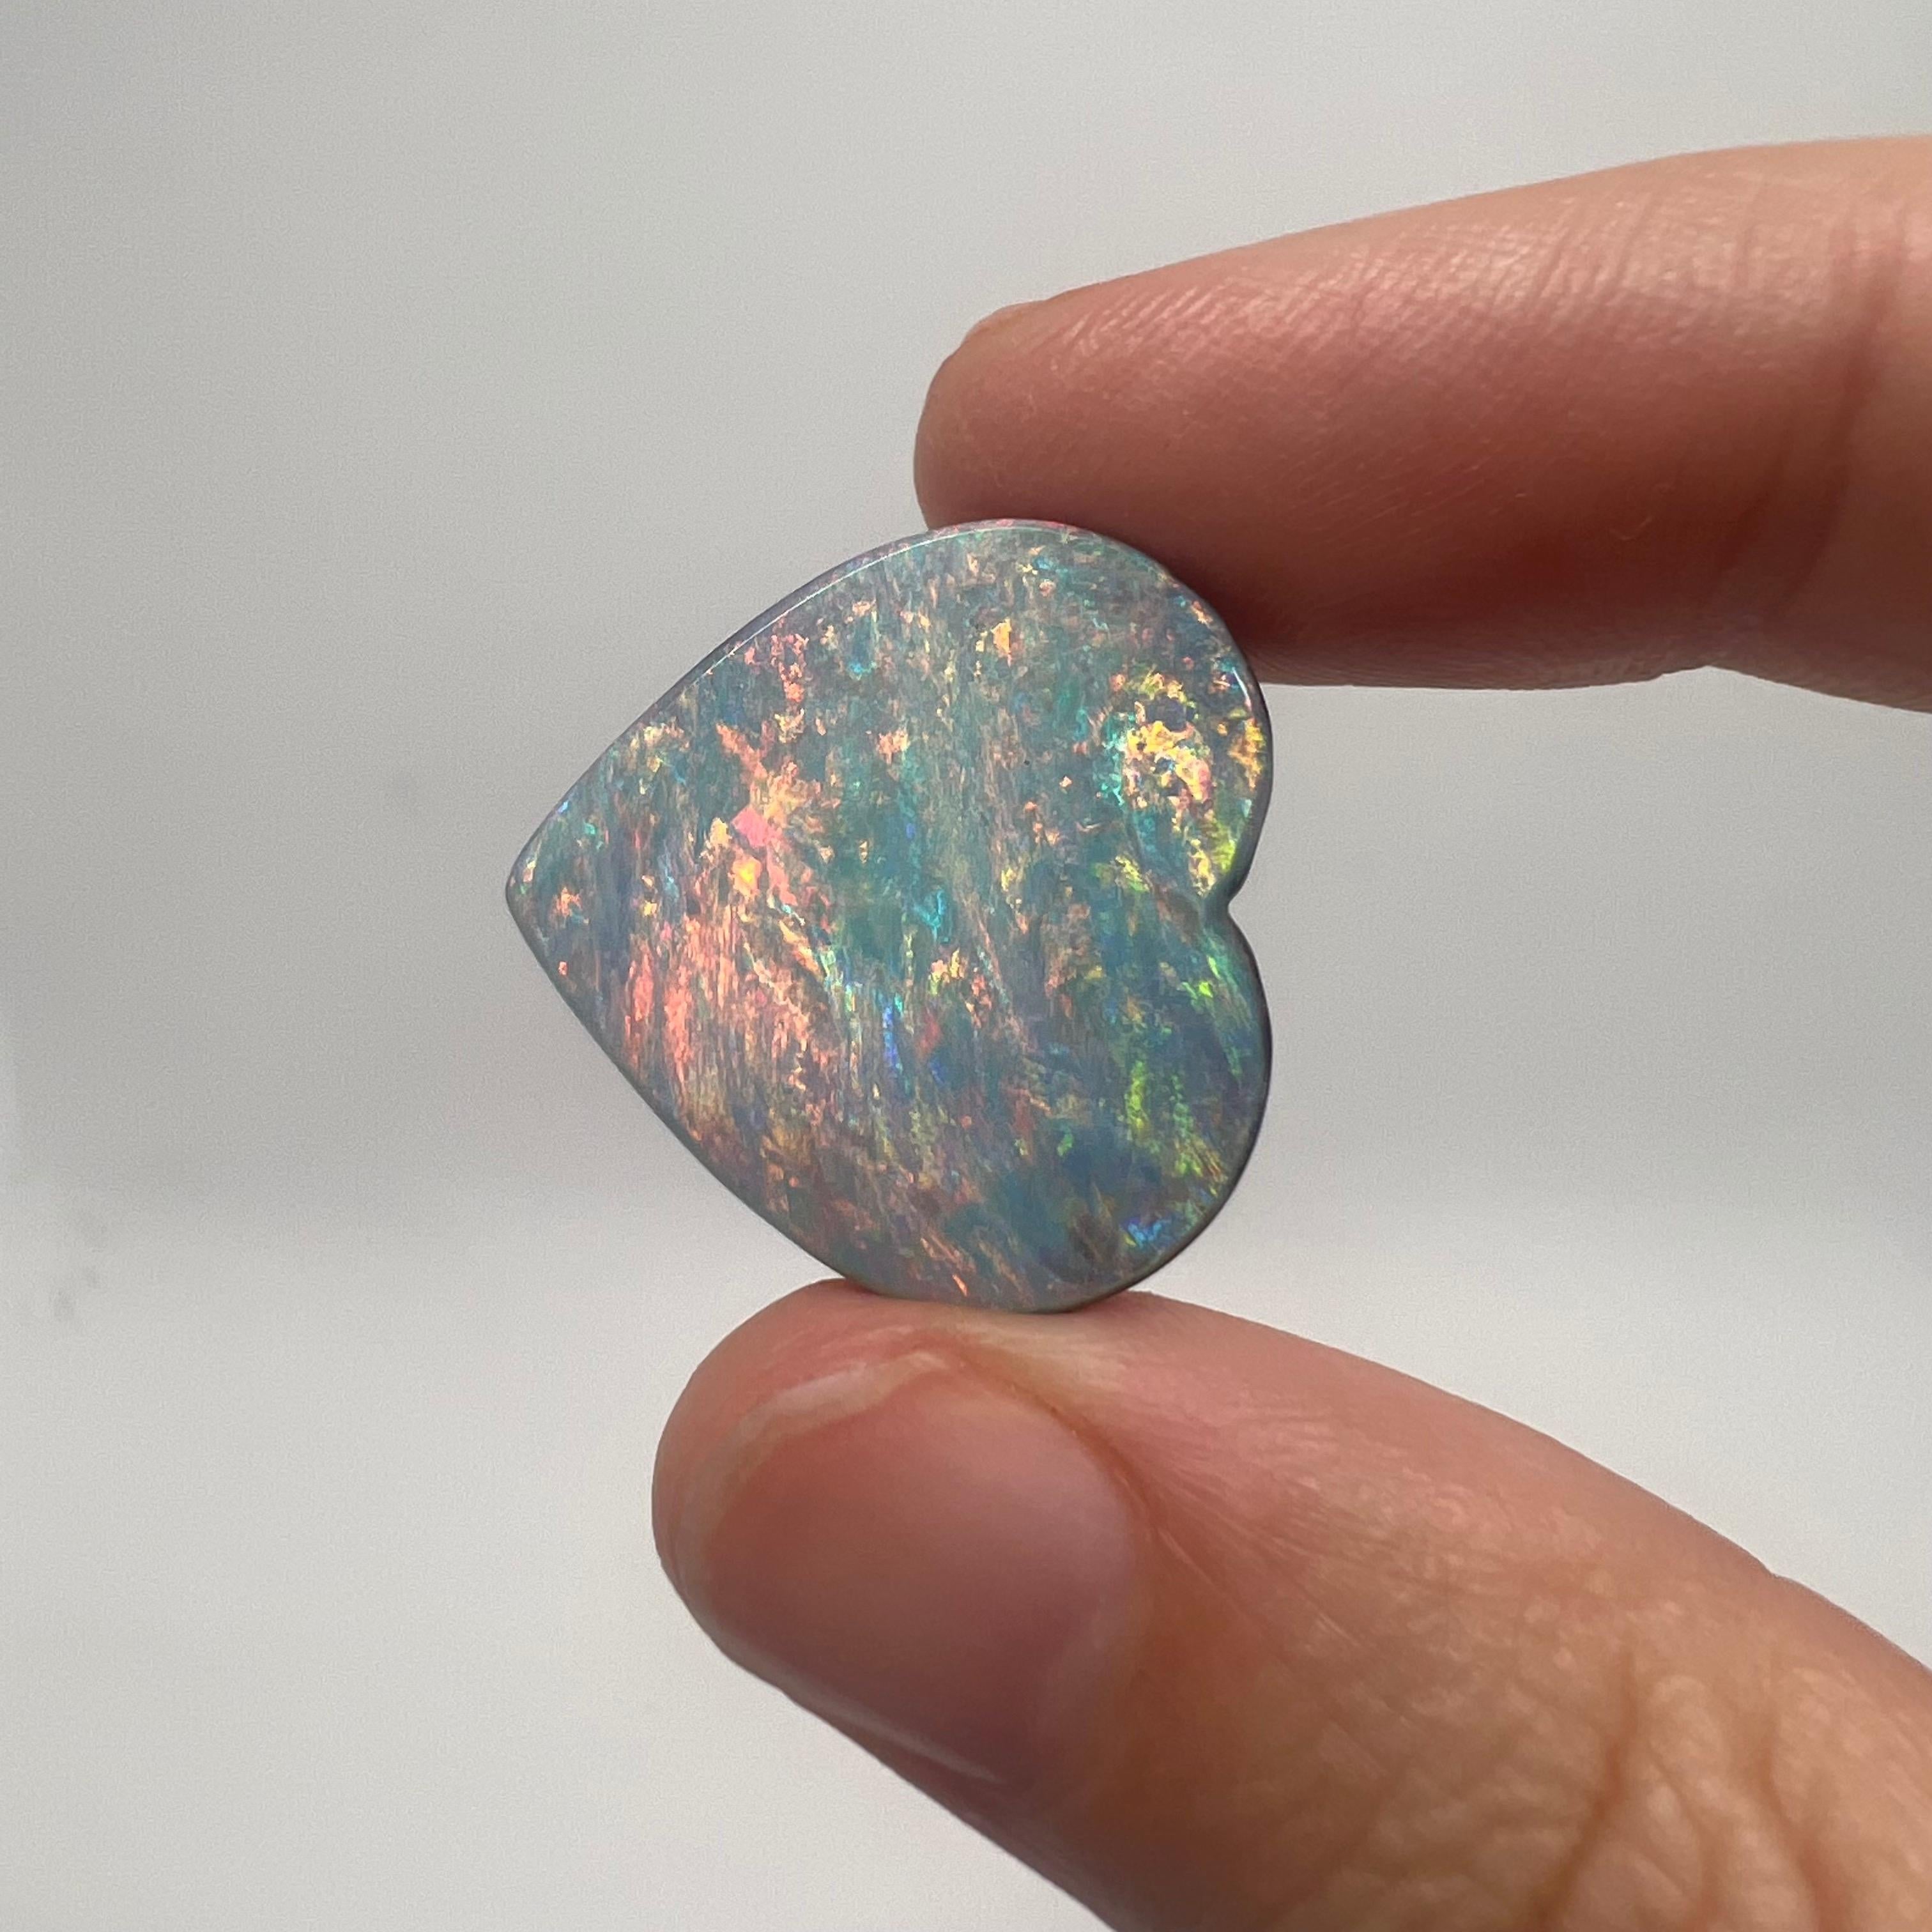 This large natural solid Australian boulder opal was mined in western Queensland, Australia by a female opal miner. It is of gem quality and its heart shape make it a very sought-after piece. Its colors are all bright and include pink, orange, aqua